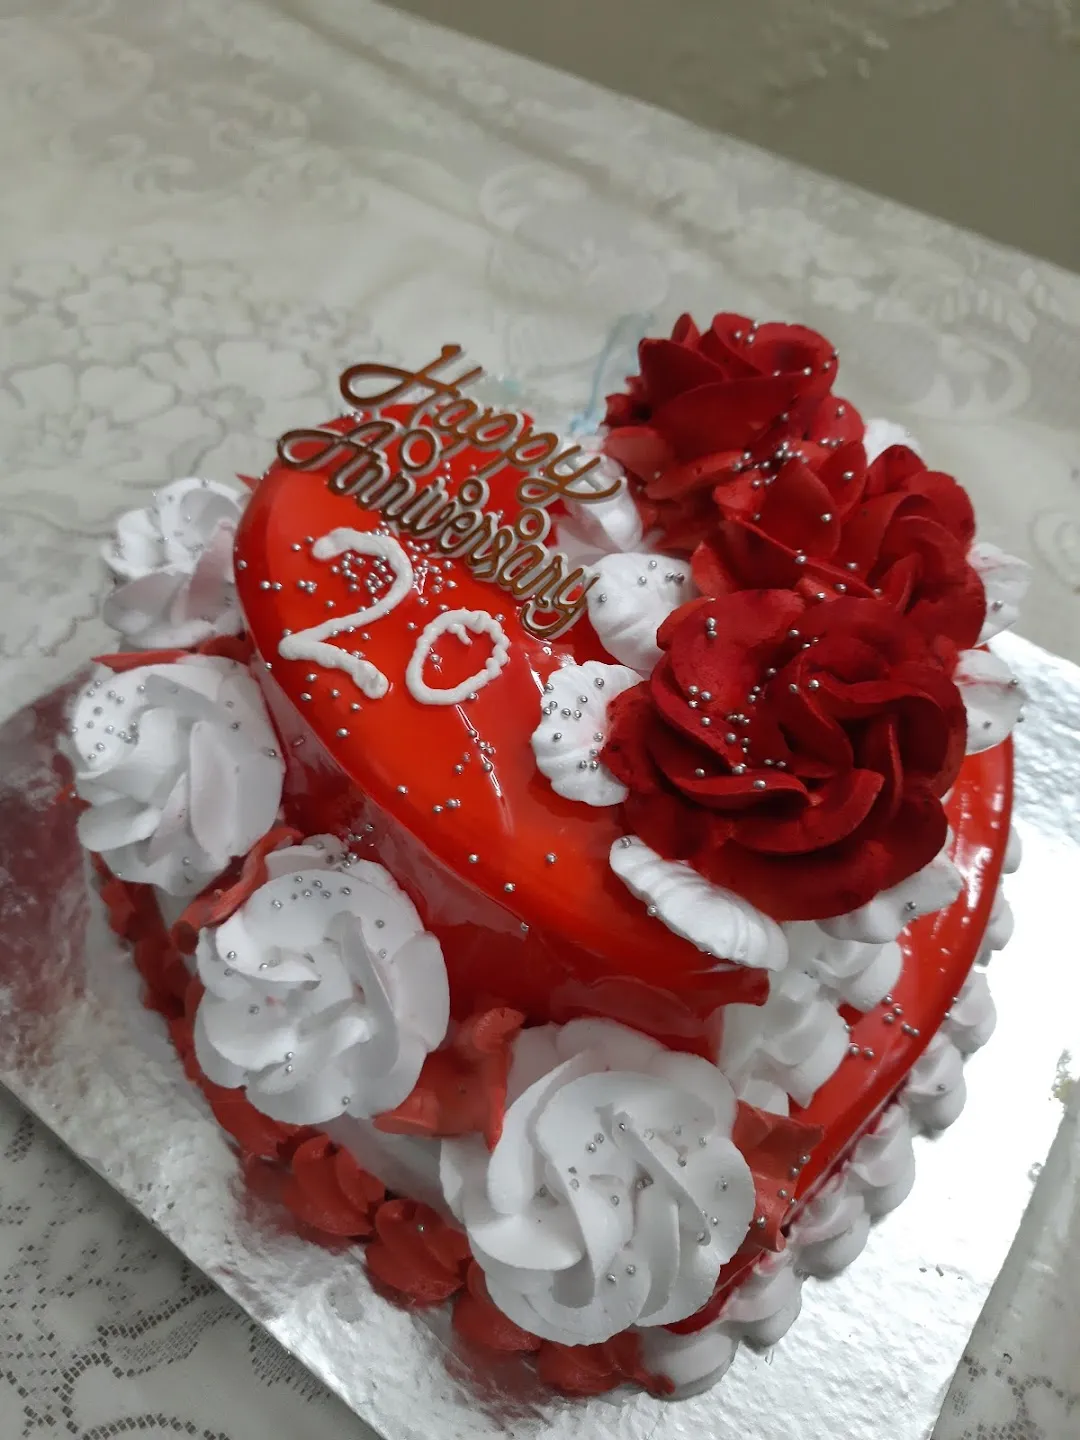 Top 10 Best Bakery In Bhopal | Famous & Top-Rated Cake Shop - Kekmart